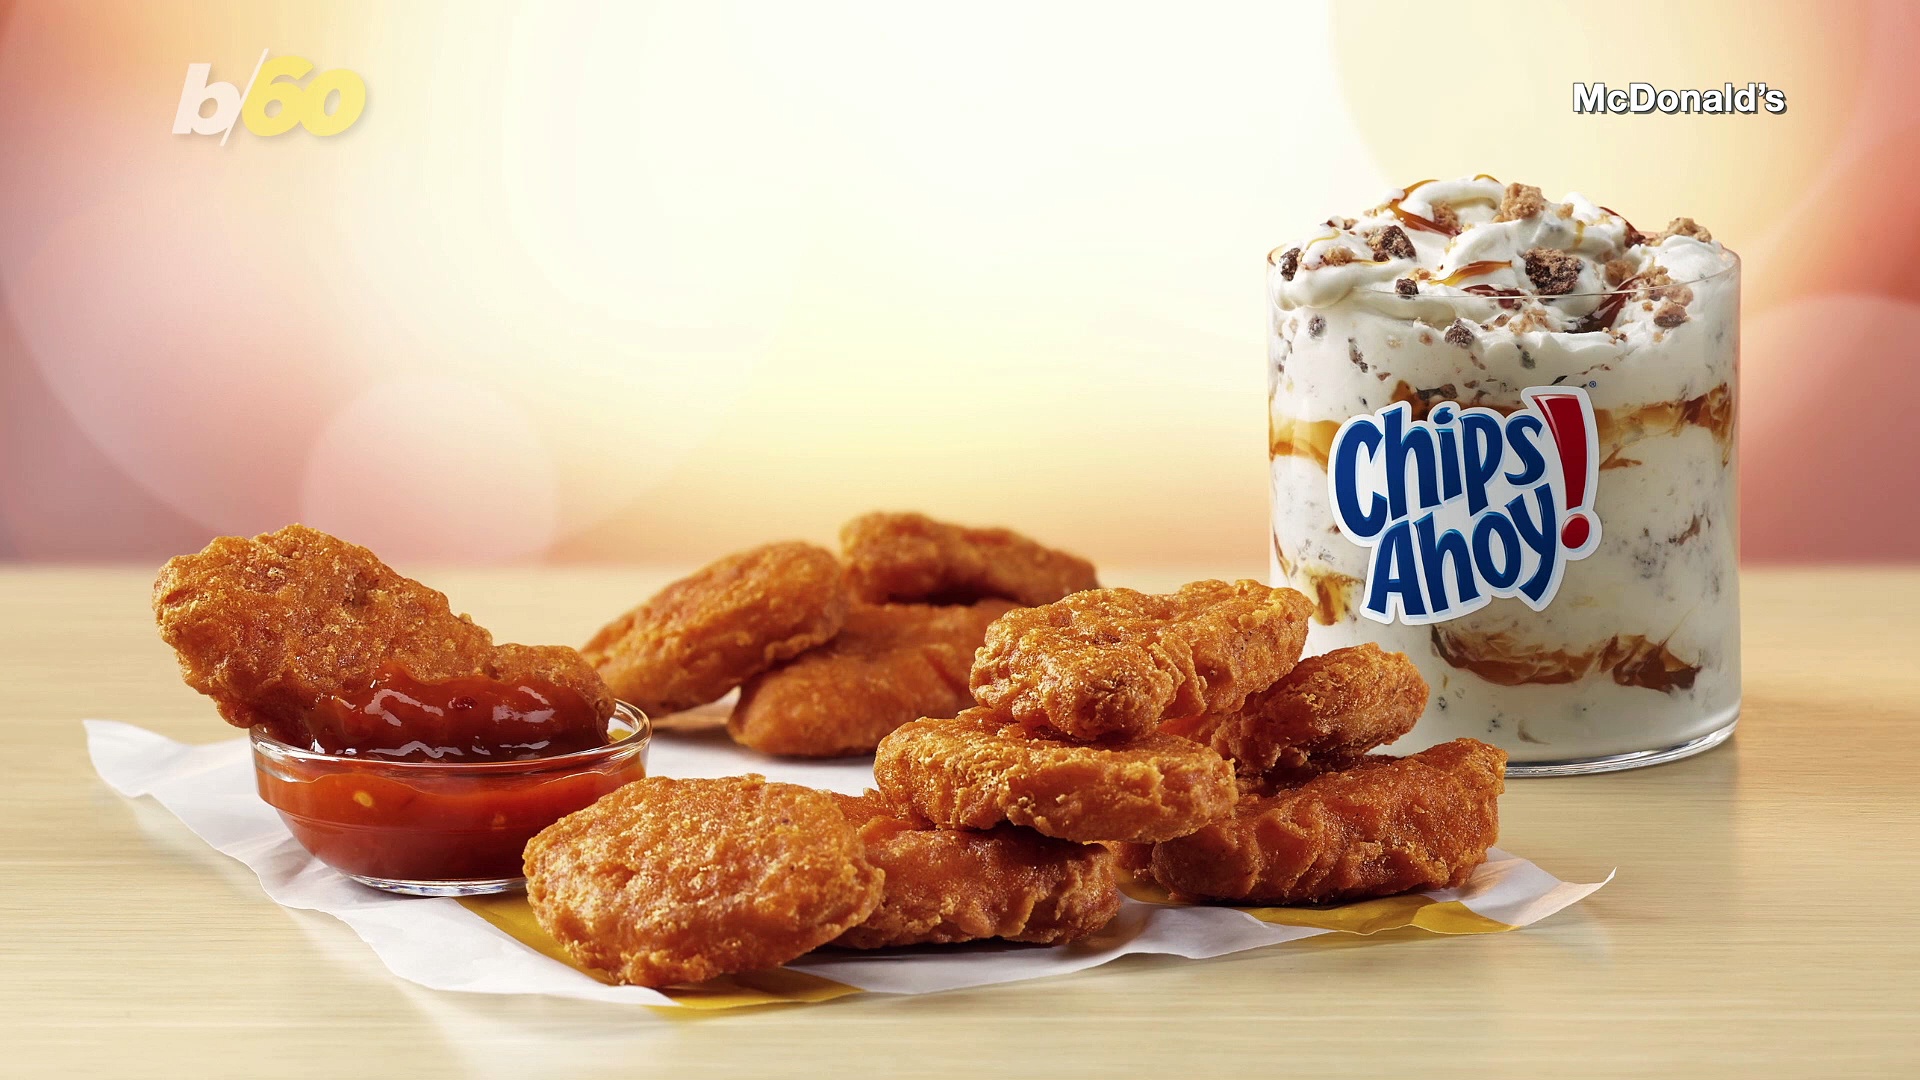 Spice up Your Life! McDonald’s Puts a Spin on McNuggets With Spicy Chicken McNuggets!